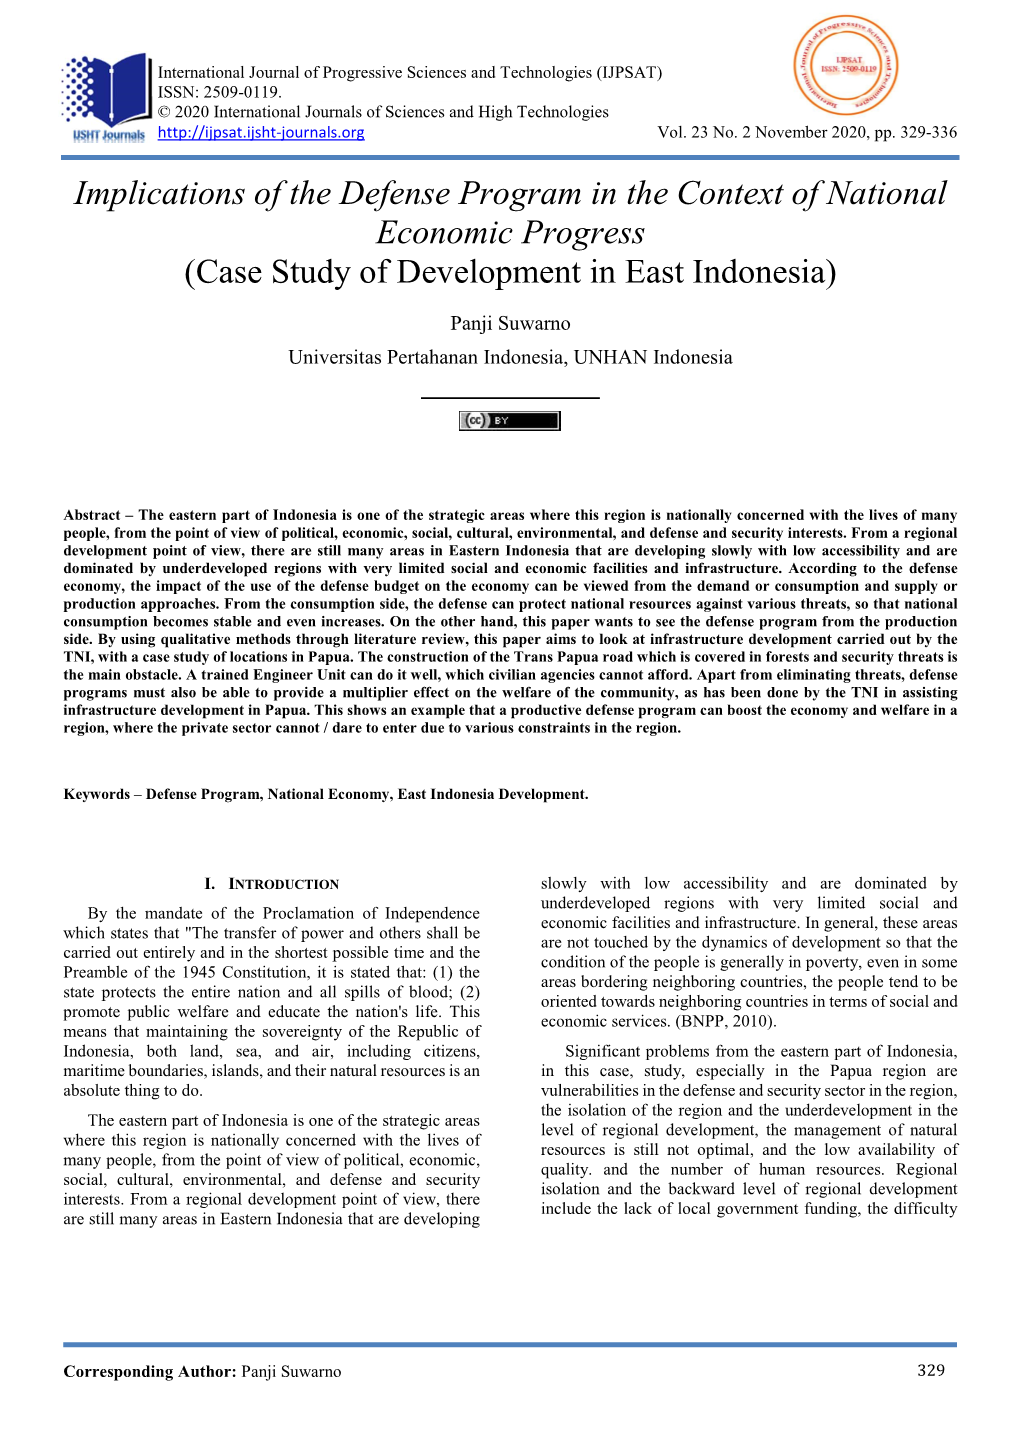 Implications of the Defense Program in the Context of National Economic Progress (Case Study of Development in East Indonesia)